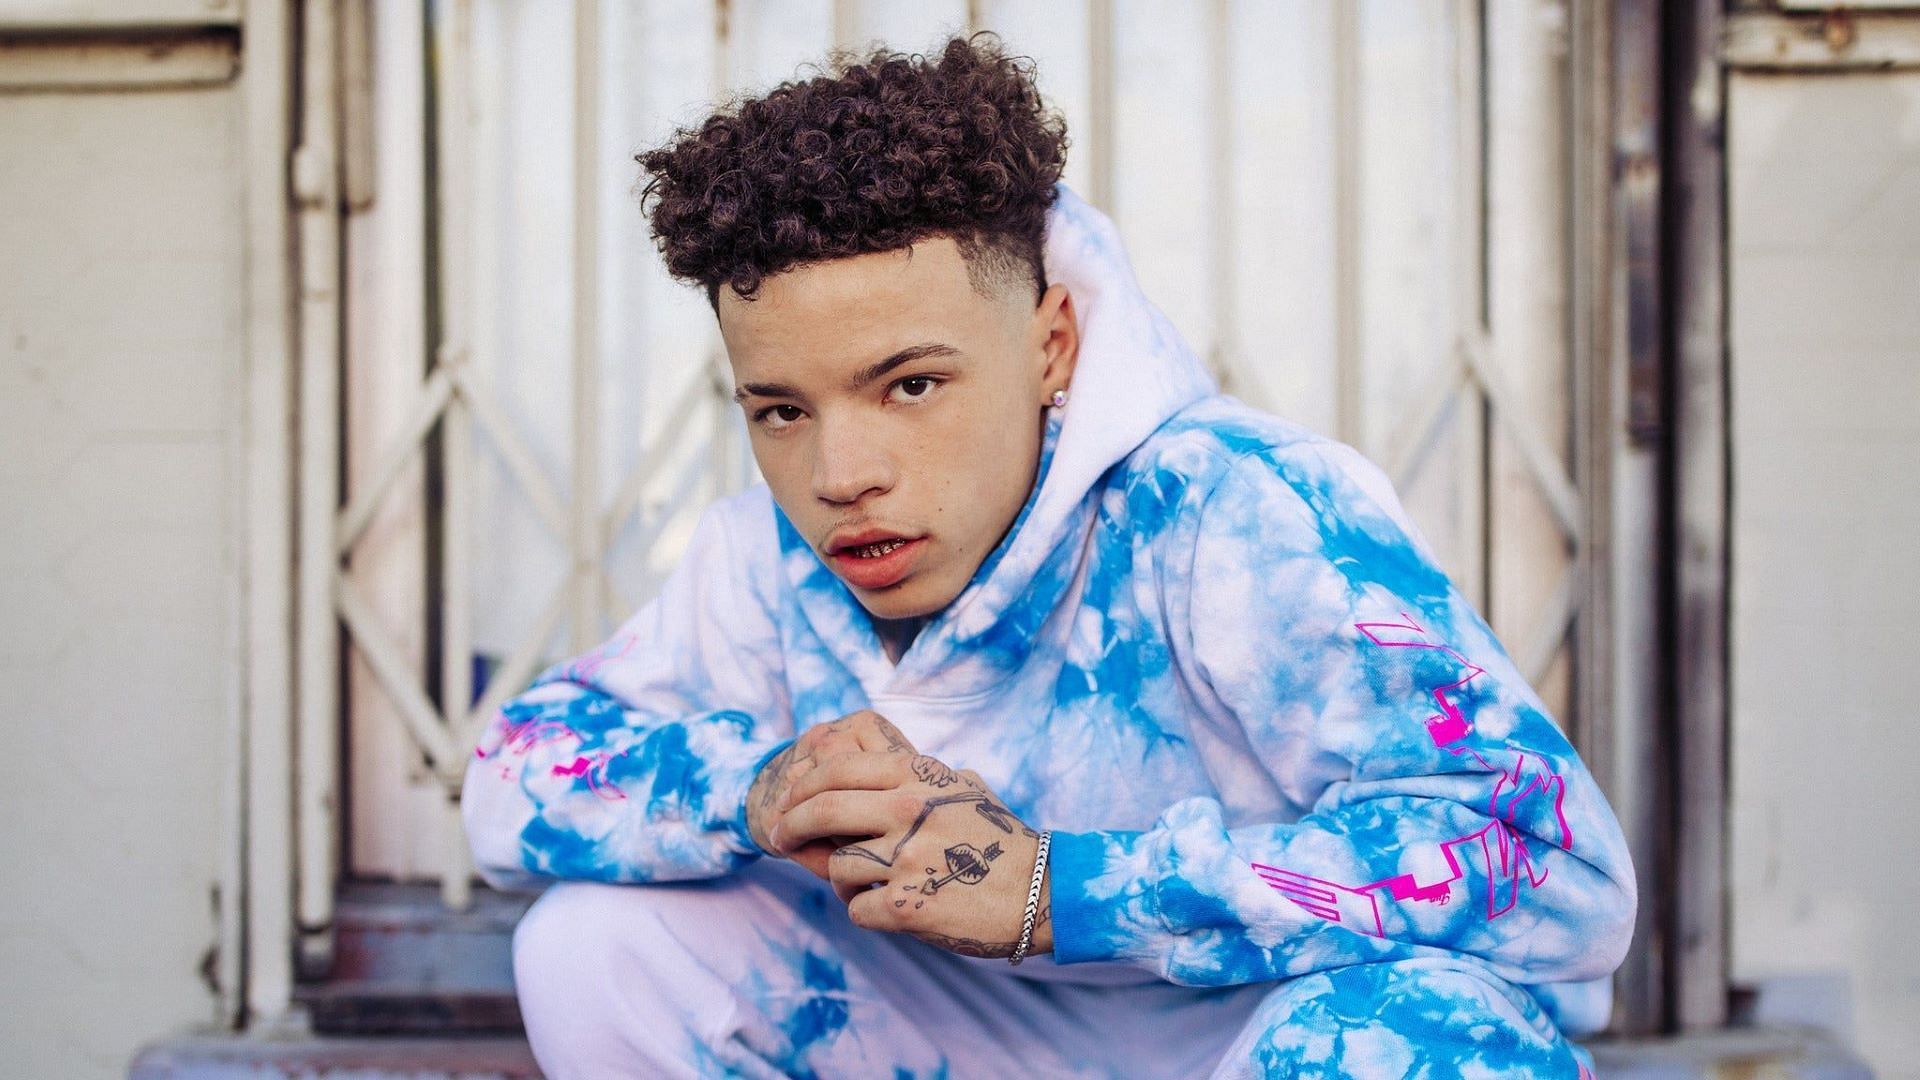 Lil Mosey (Image by Jeremy Deputat/Getty Images)